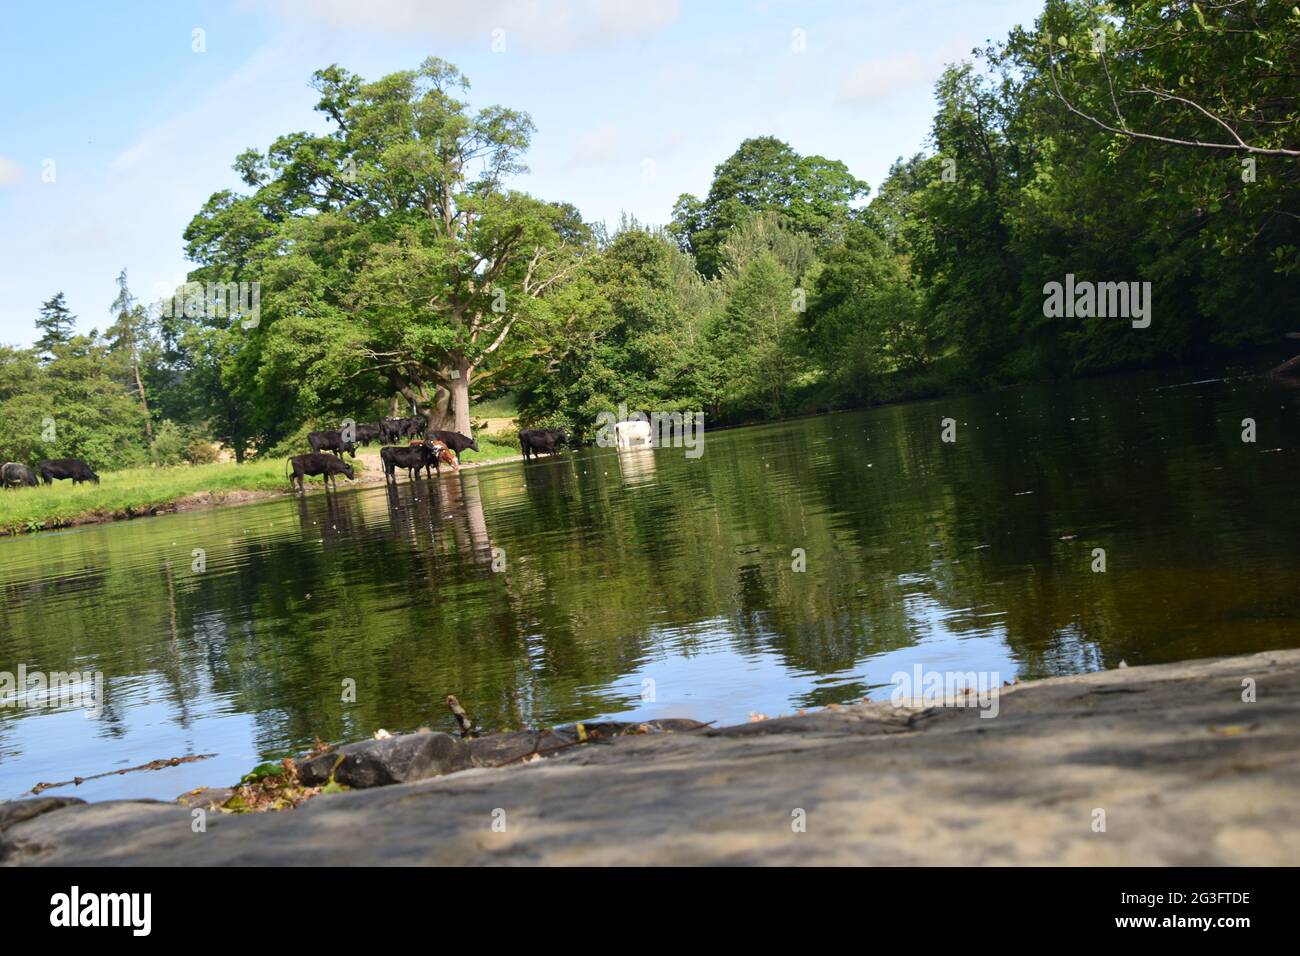 Summer scenes on the River Dee close to Llangollen, Denbighshire. Showing cattle at waters edge, the chain bridge and shore line. Stock Photo